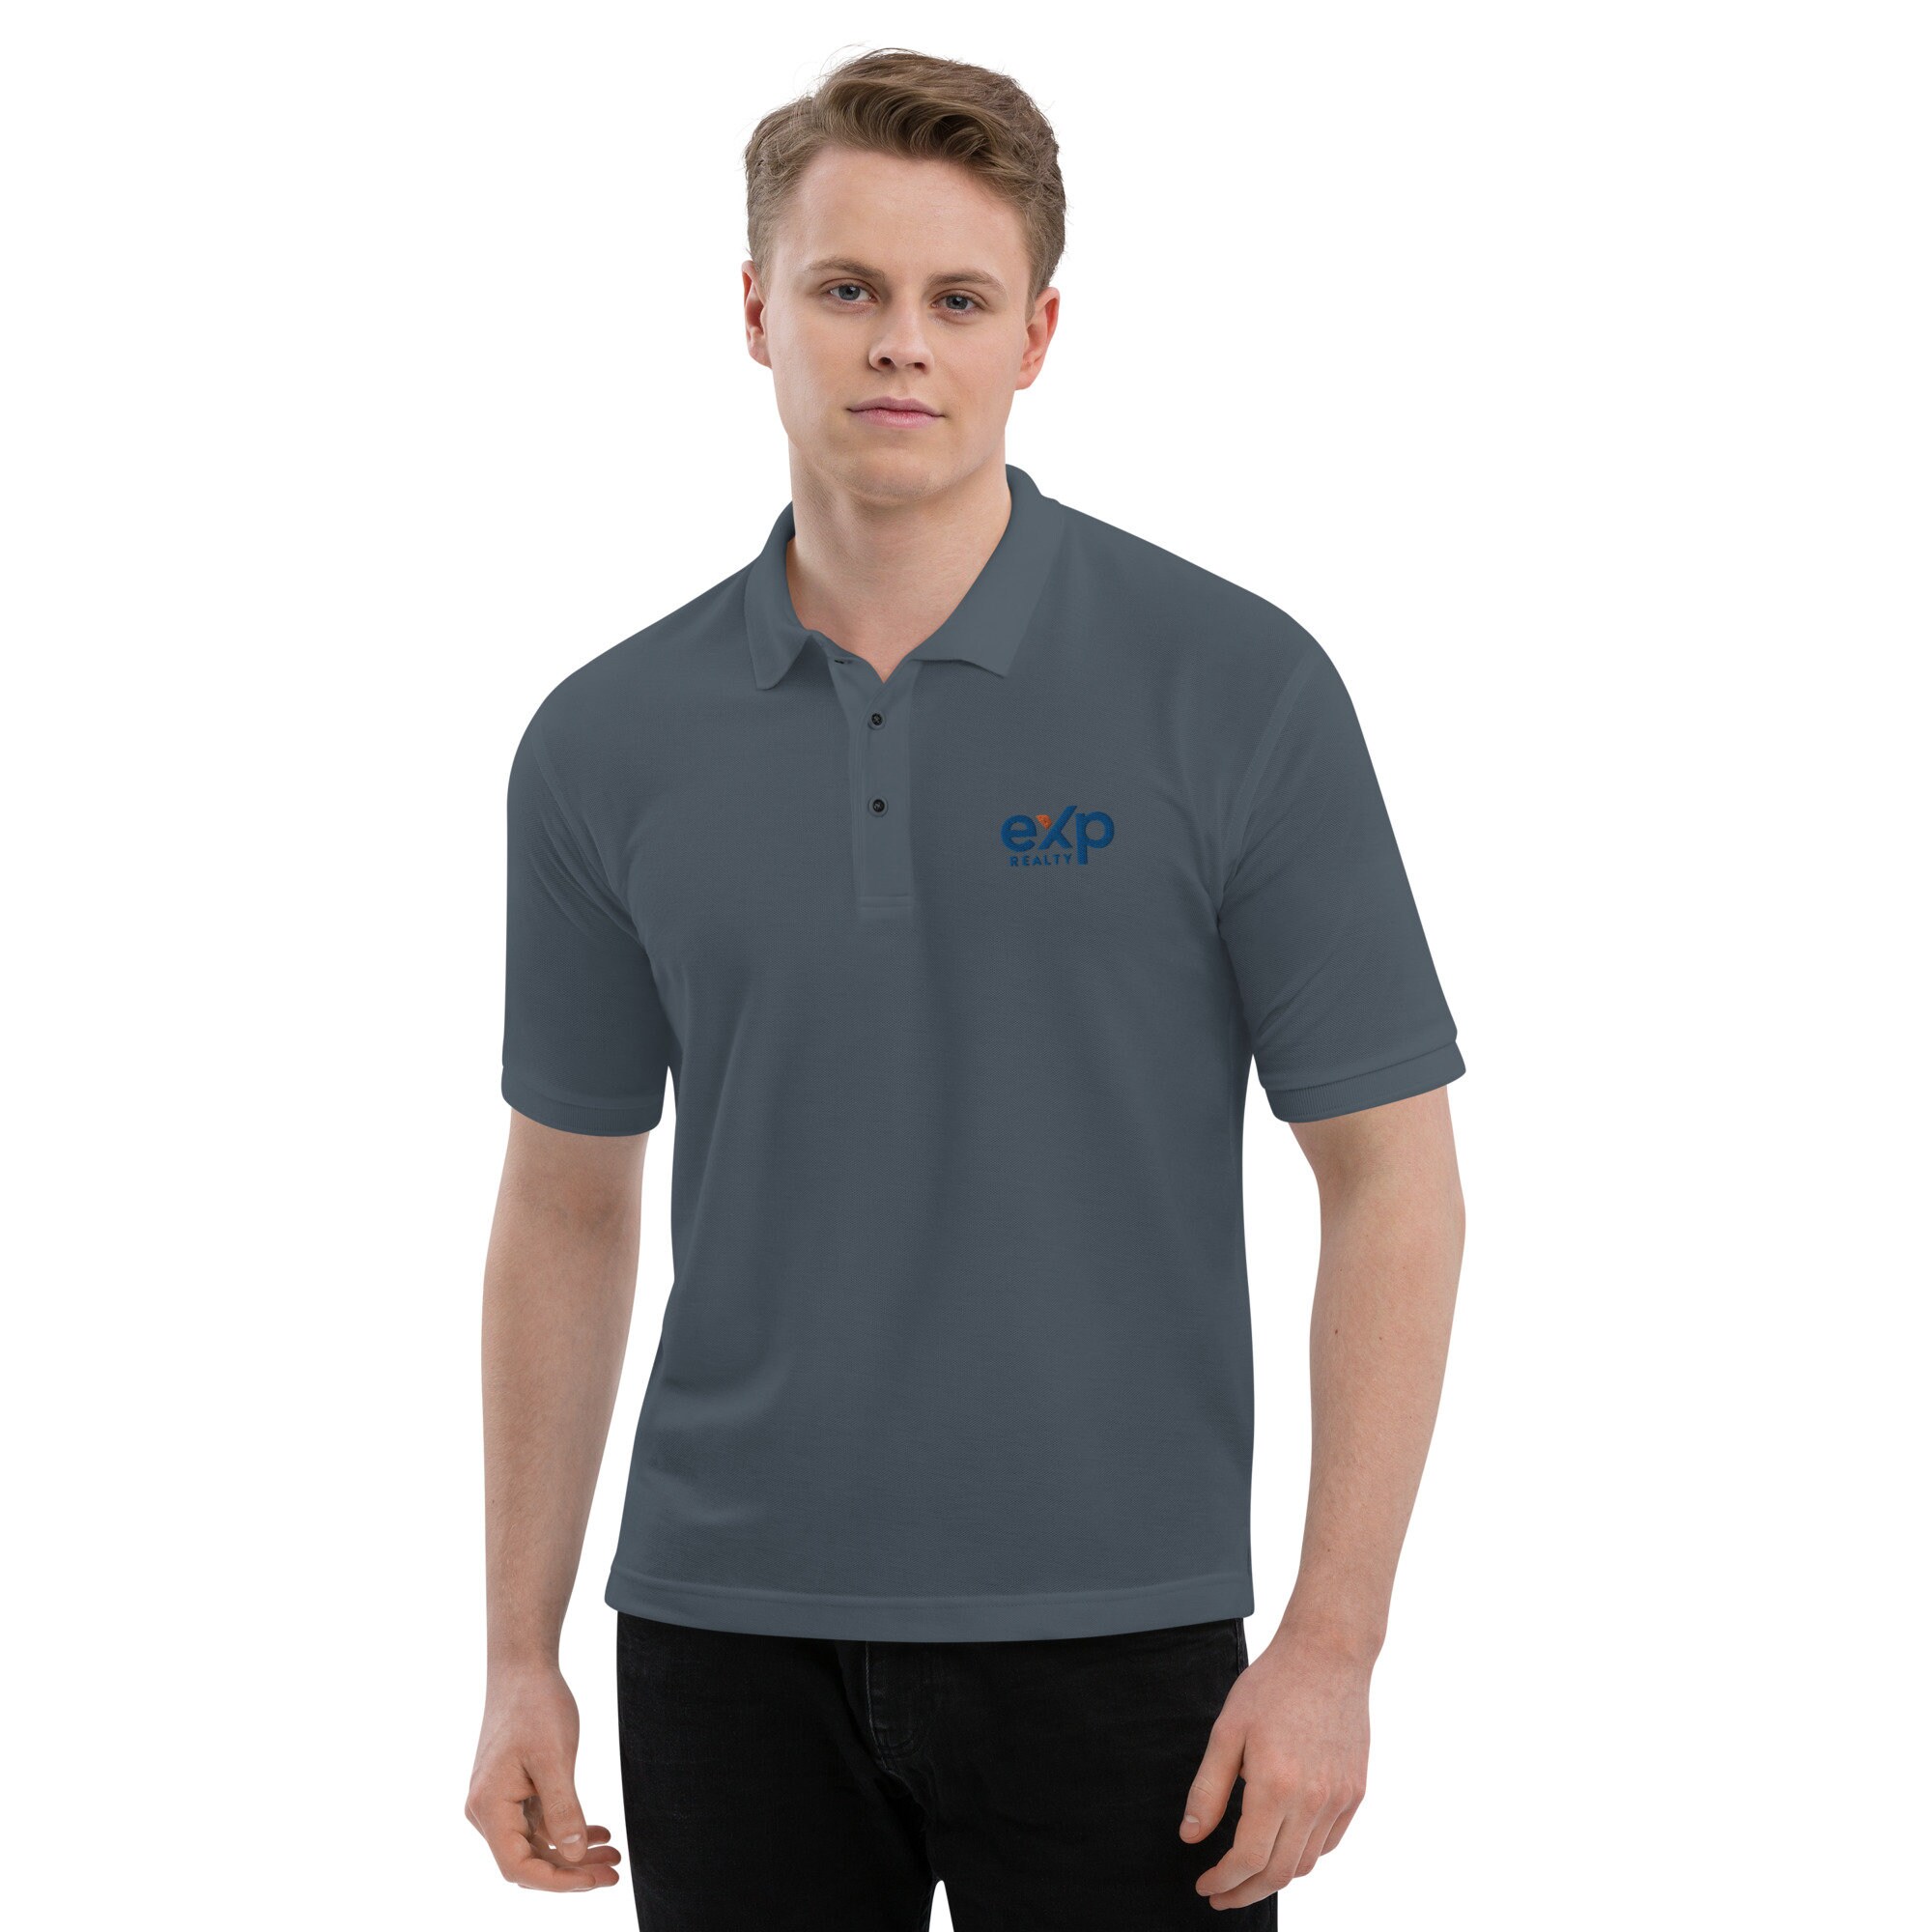 Exp Realty Premium Embroidered Polo Shirt Exp Realty Polo - Etsy